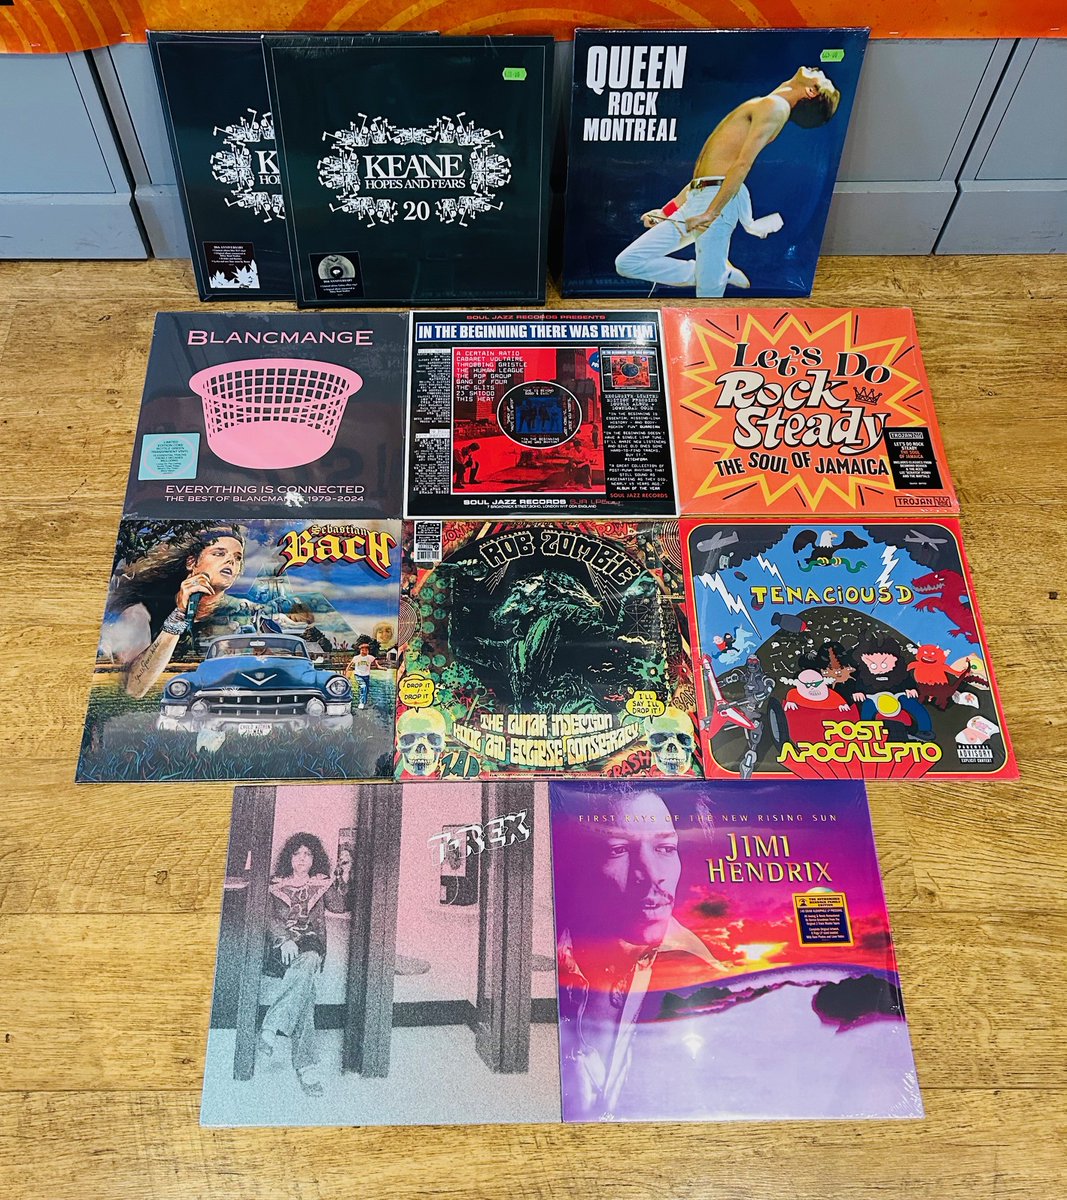 #NewMusicFriday New albums from @KingsOfLeon, @wearevillagers, @ArabStrapBand plus @KeeleyForsyth (@dinkededition SOLD OUT), previous SK guests @thisismemorial, reissues from @keaneofficial, @queenwillrock, comps from @trojanrecords and @SoulJazzRecords and more... #WaxUpdate